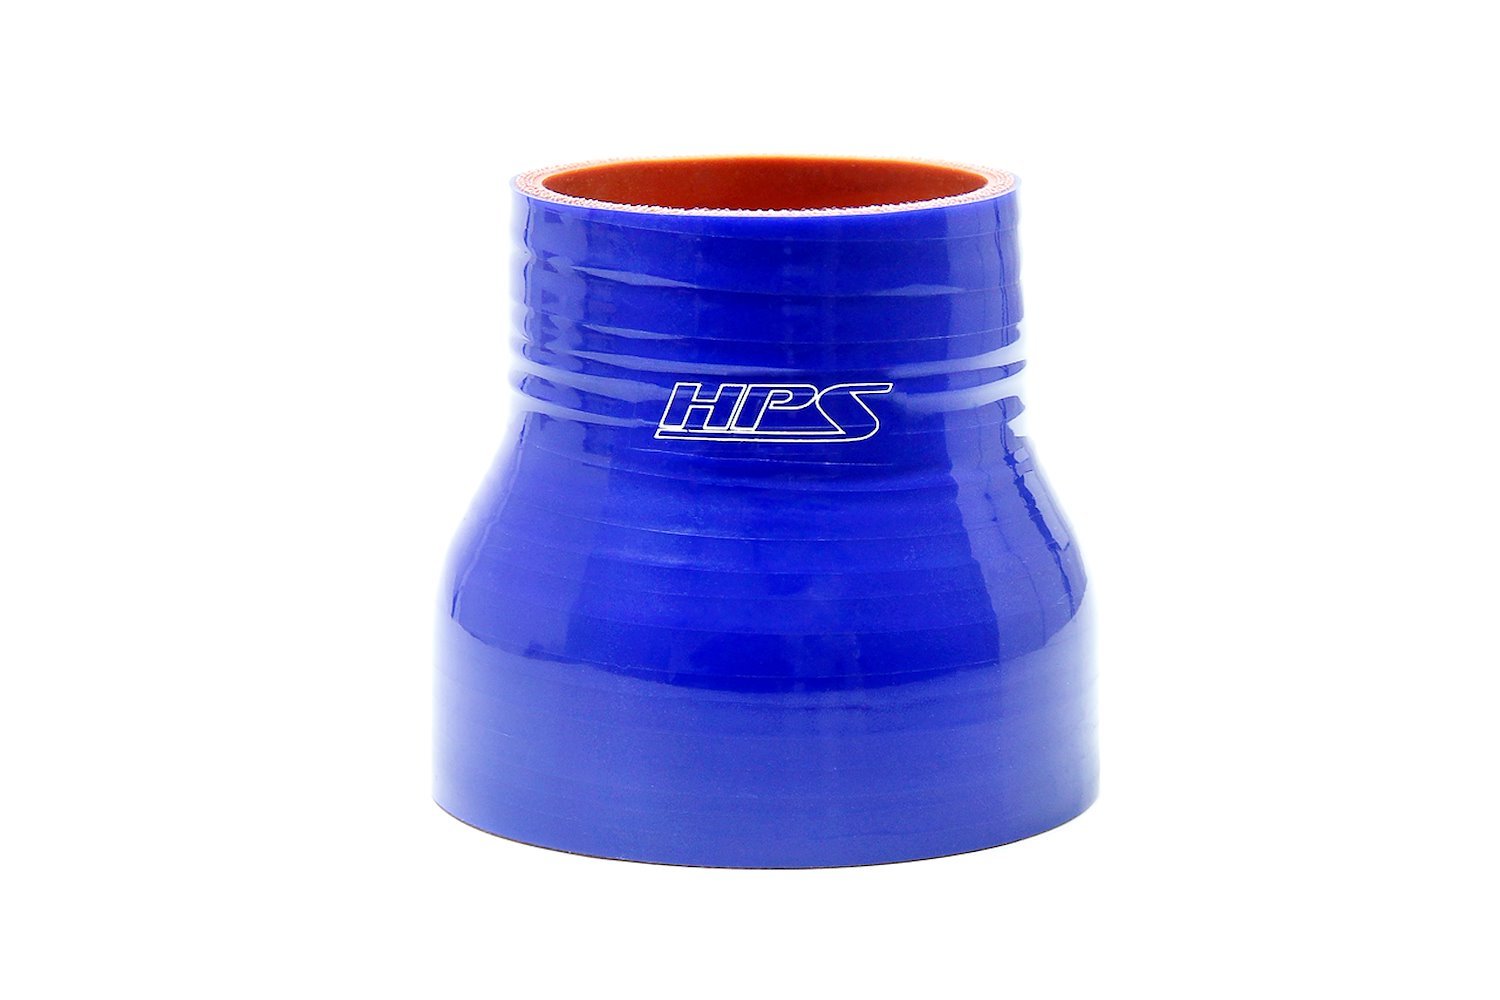 HTSR-162-250-BLUE Silicone Reducer Hose, High-Temp 4-Ply Reinforced, 1-5/8 in. - 2-1/2 in. ID, 3 in. Long, Blue